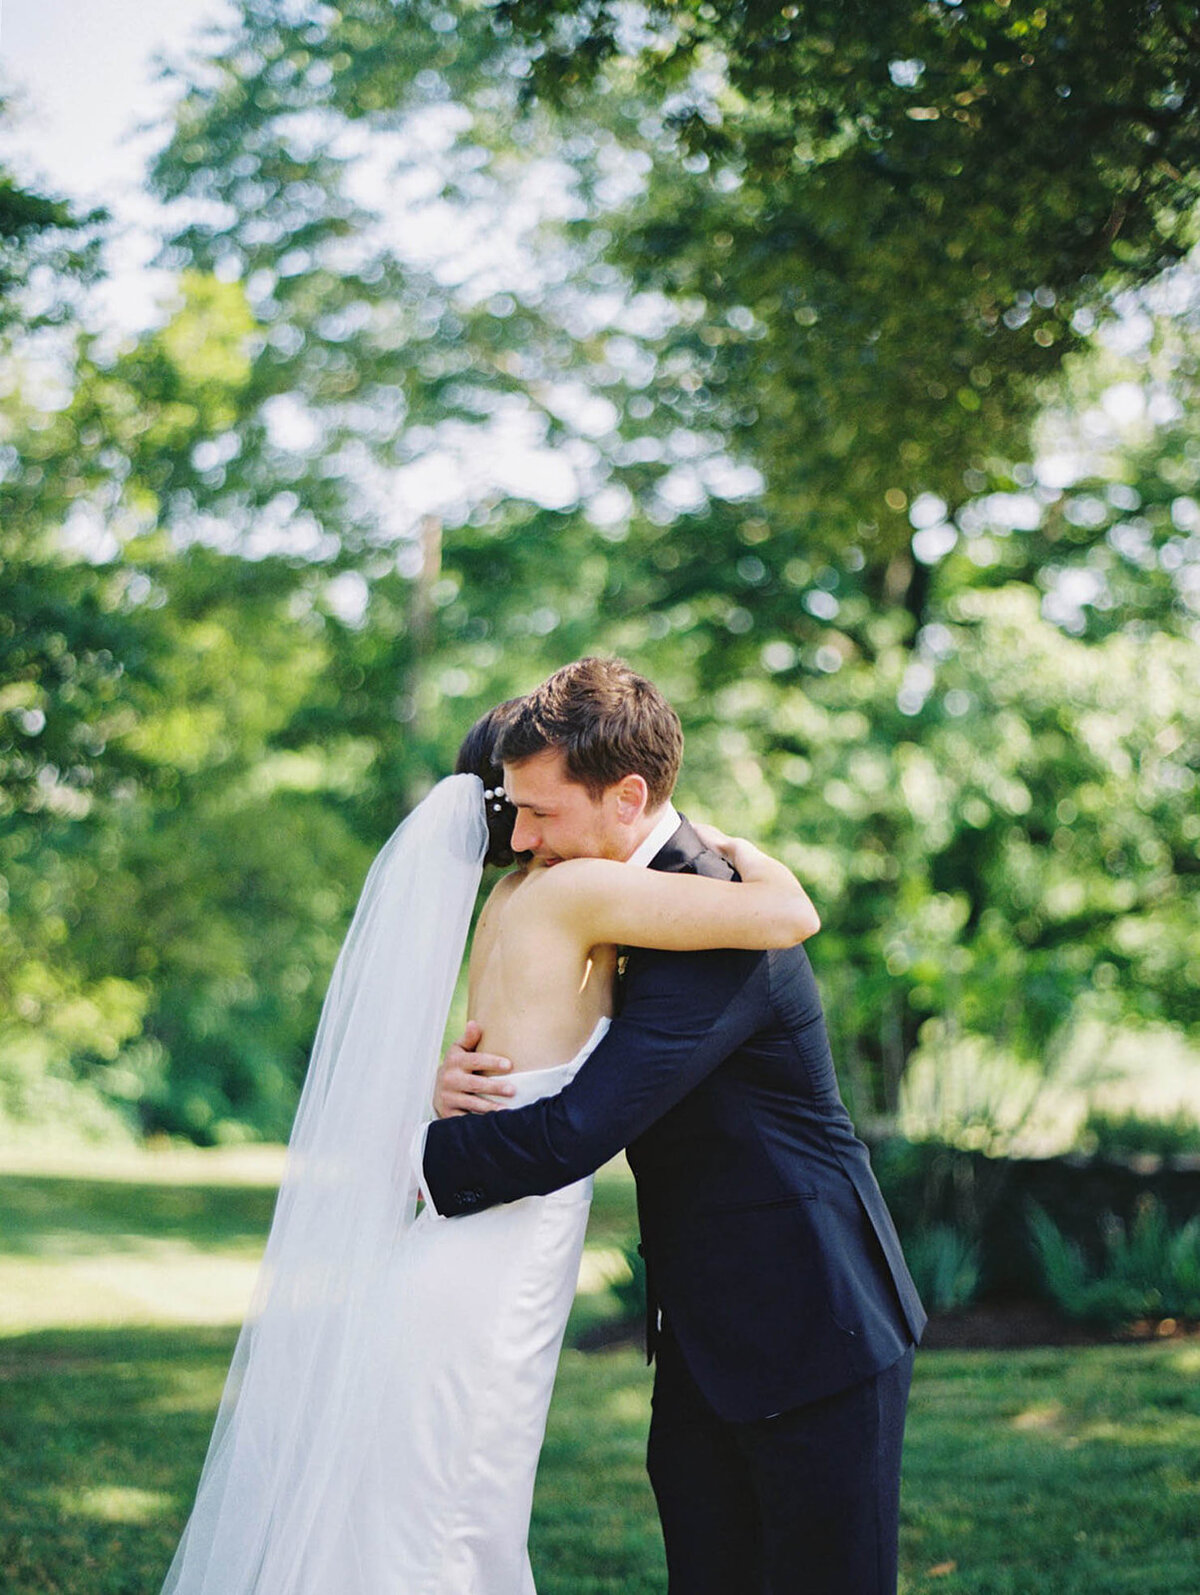 A bride and groom embrace for the first time on their wedding day